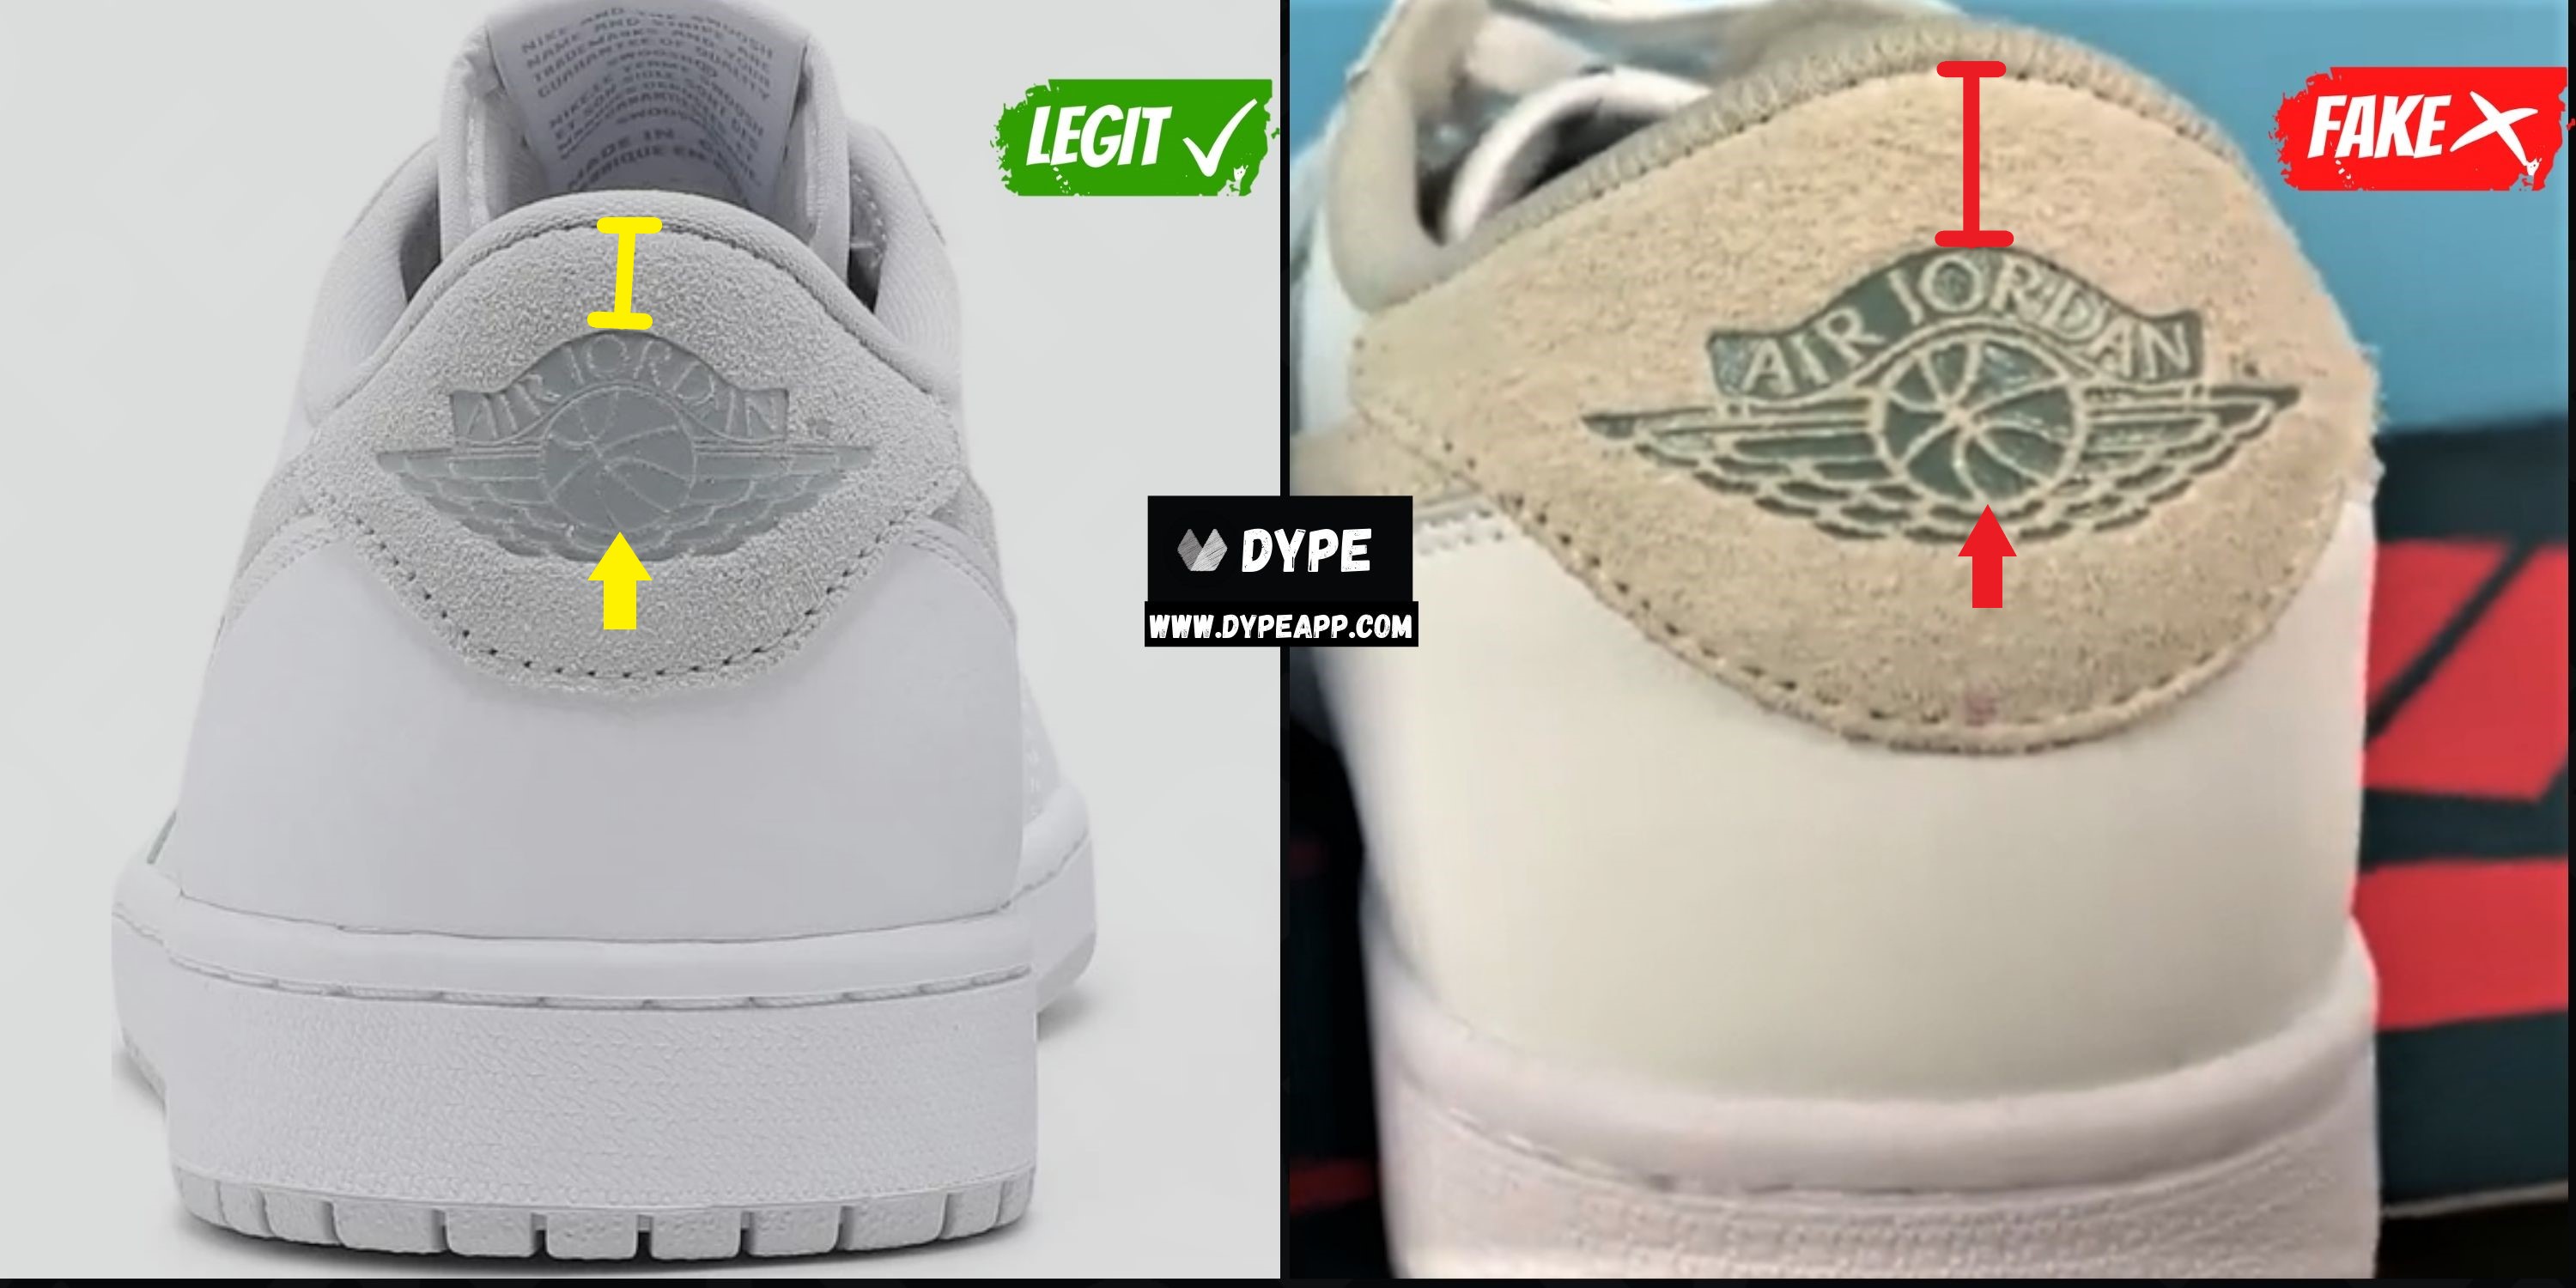 how to tell if jordan 1 low are fake